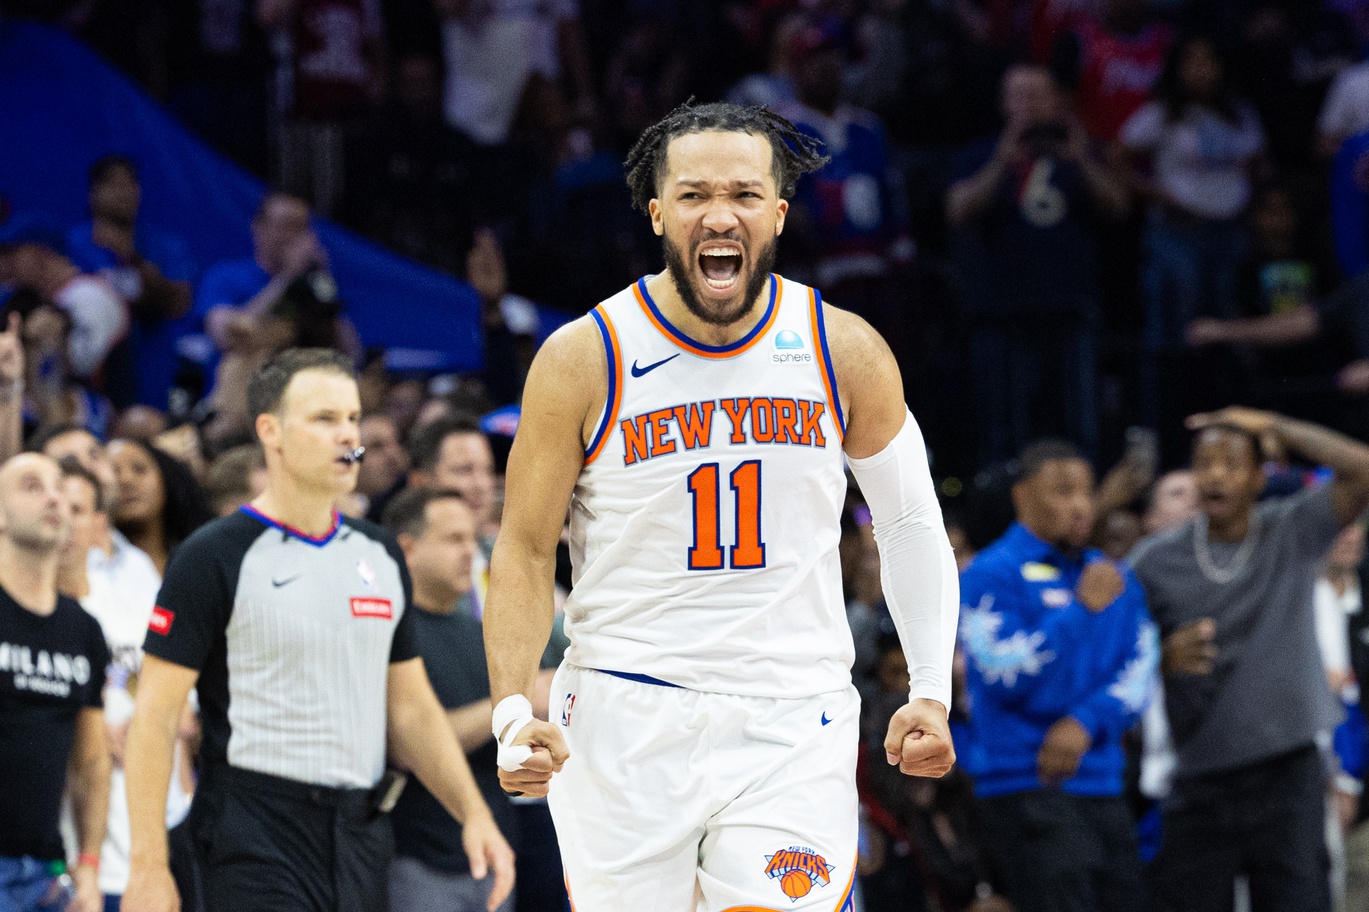 New York Knicks’ Playoff Journey Comes to a Surprising Conclusion, Jalen Brunson’s Game 7 Injury and Team’s Remarkable Determination